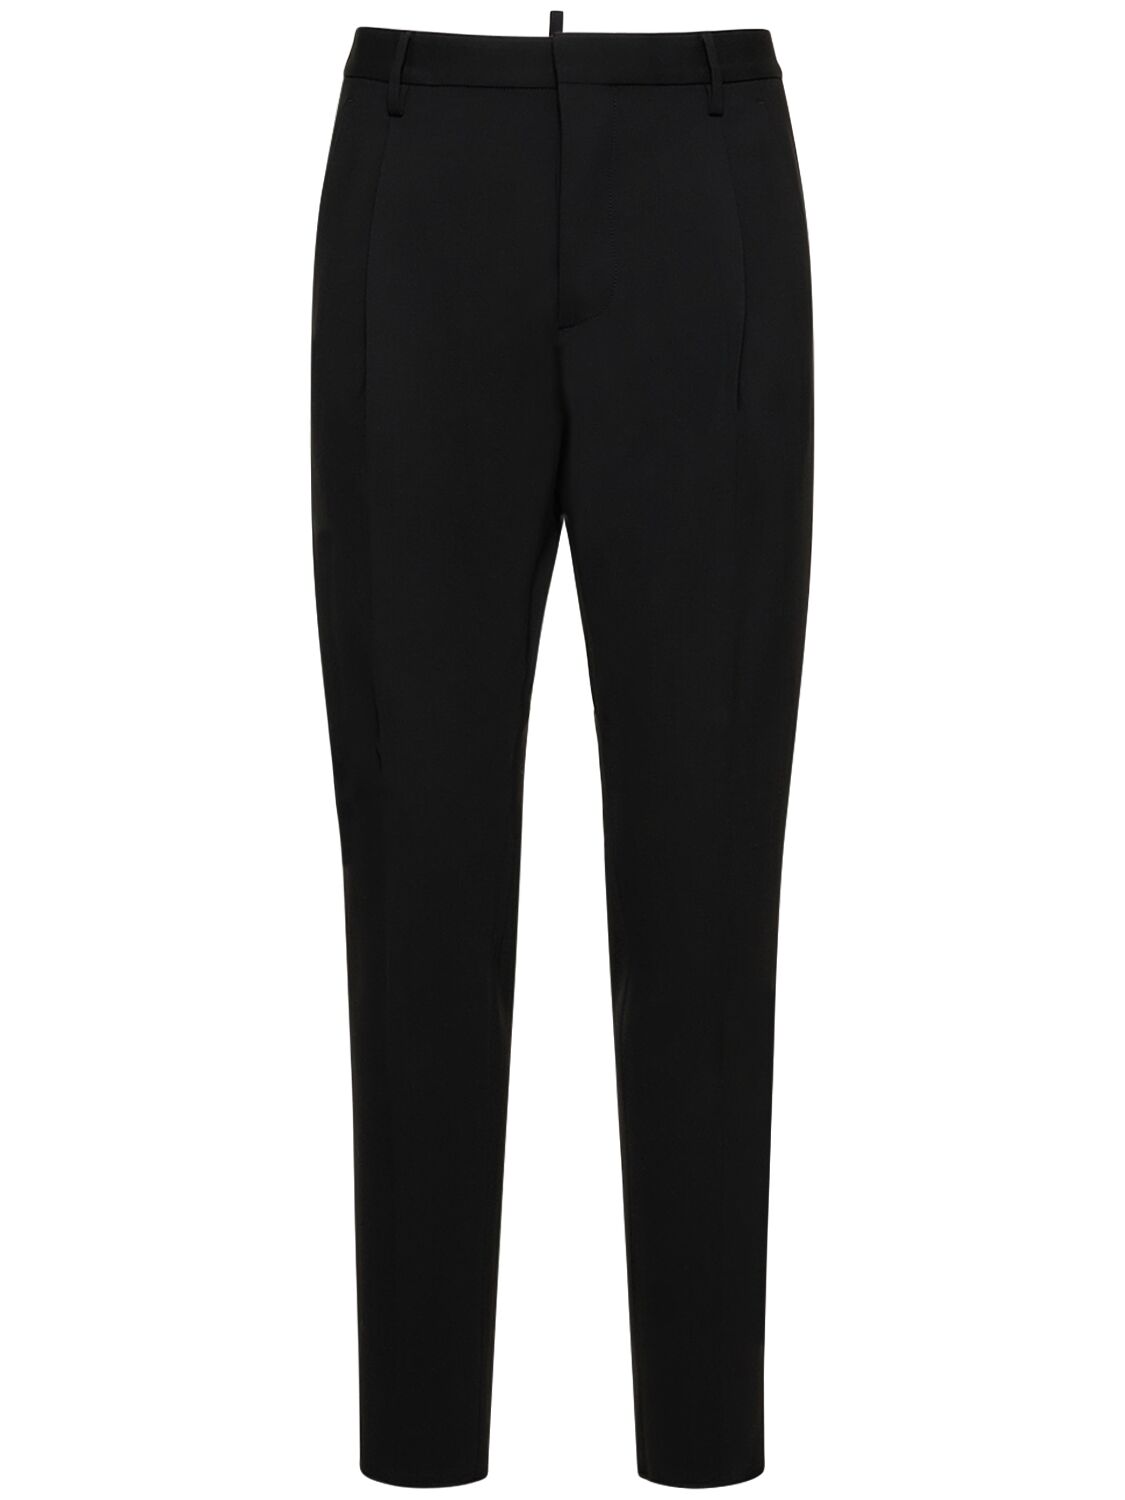 Ceresio 9 Stretch Wool Pants